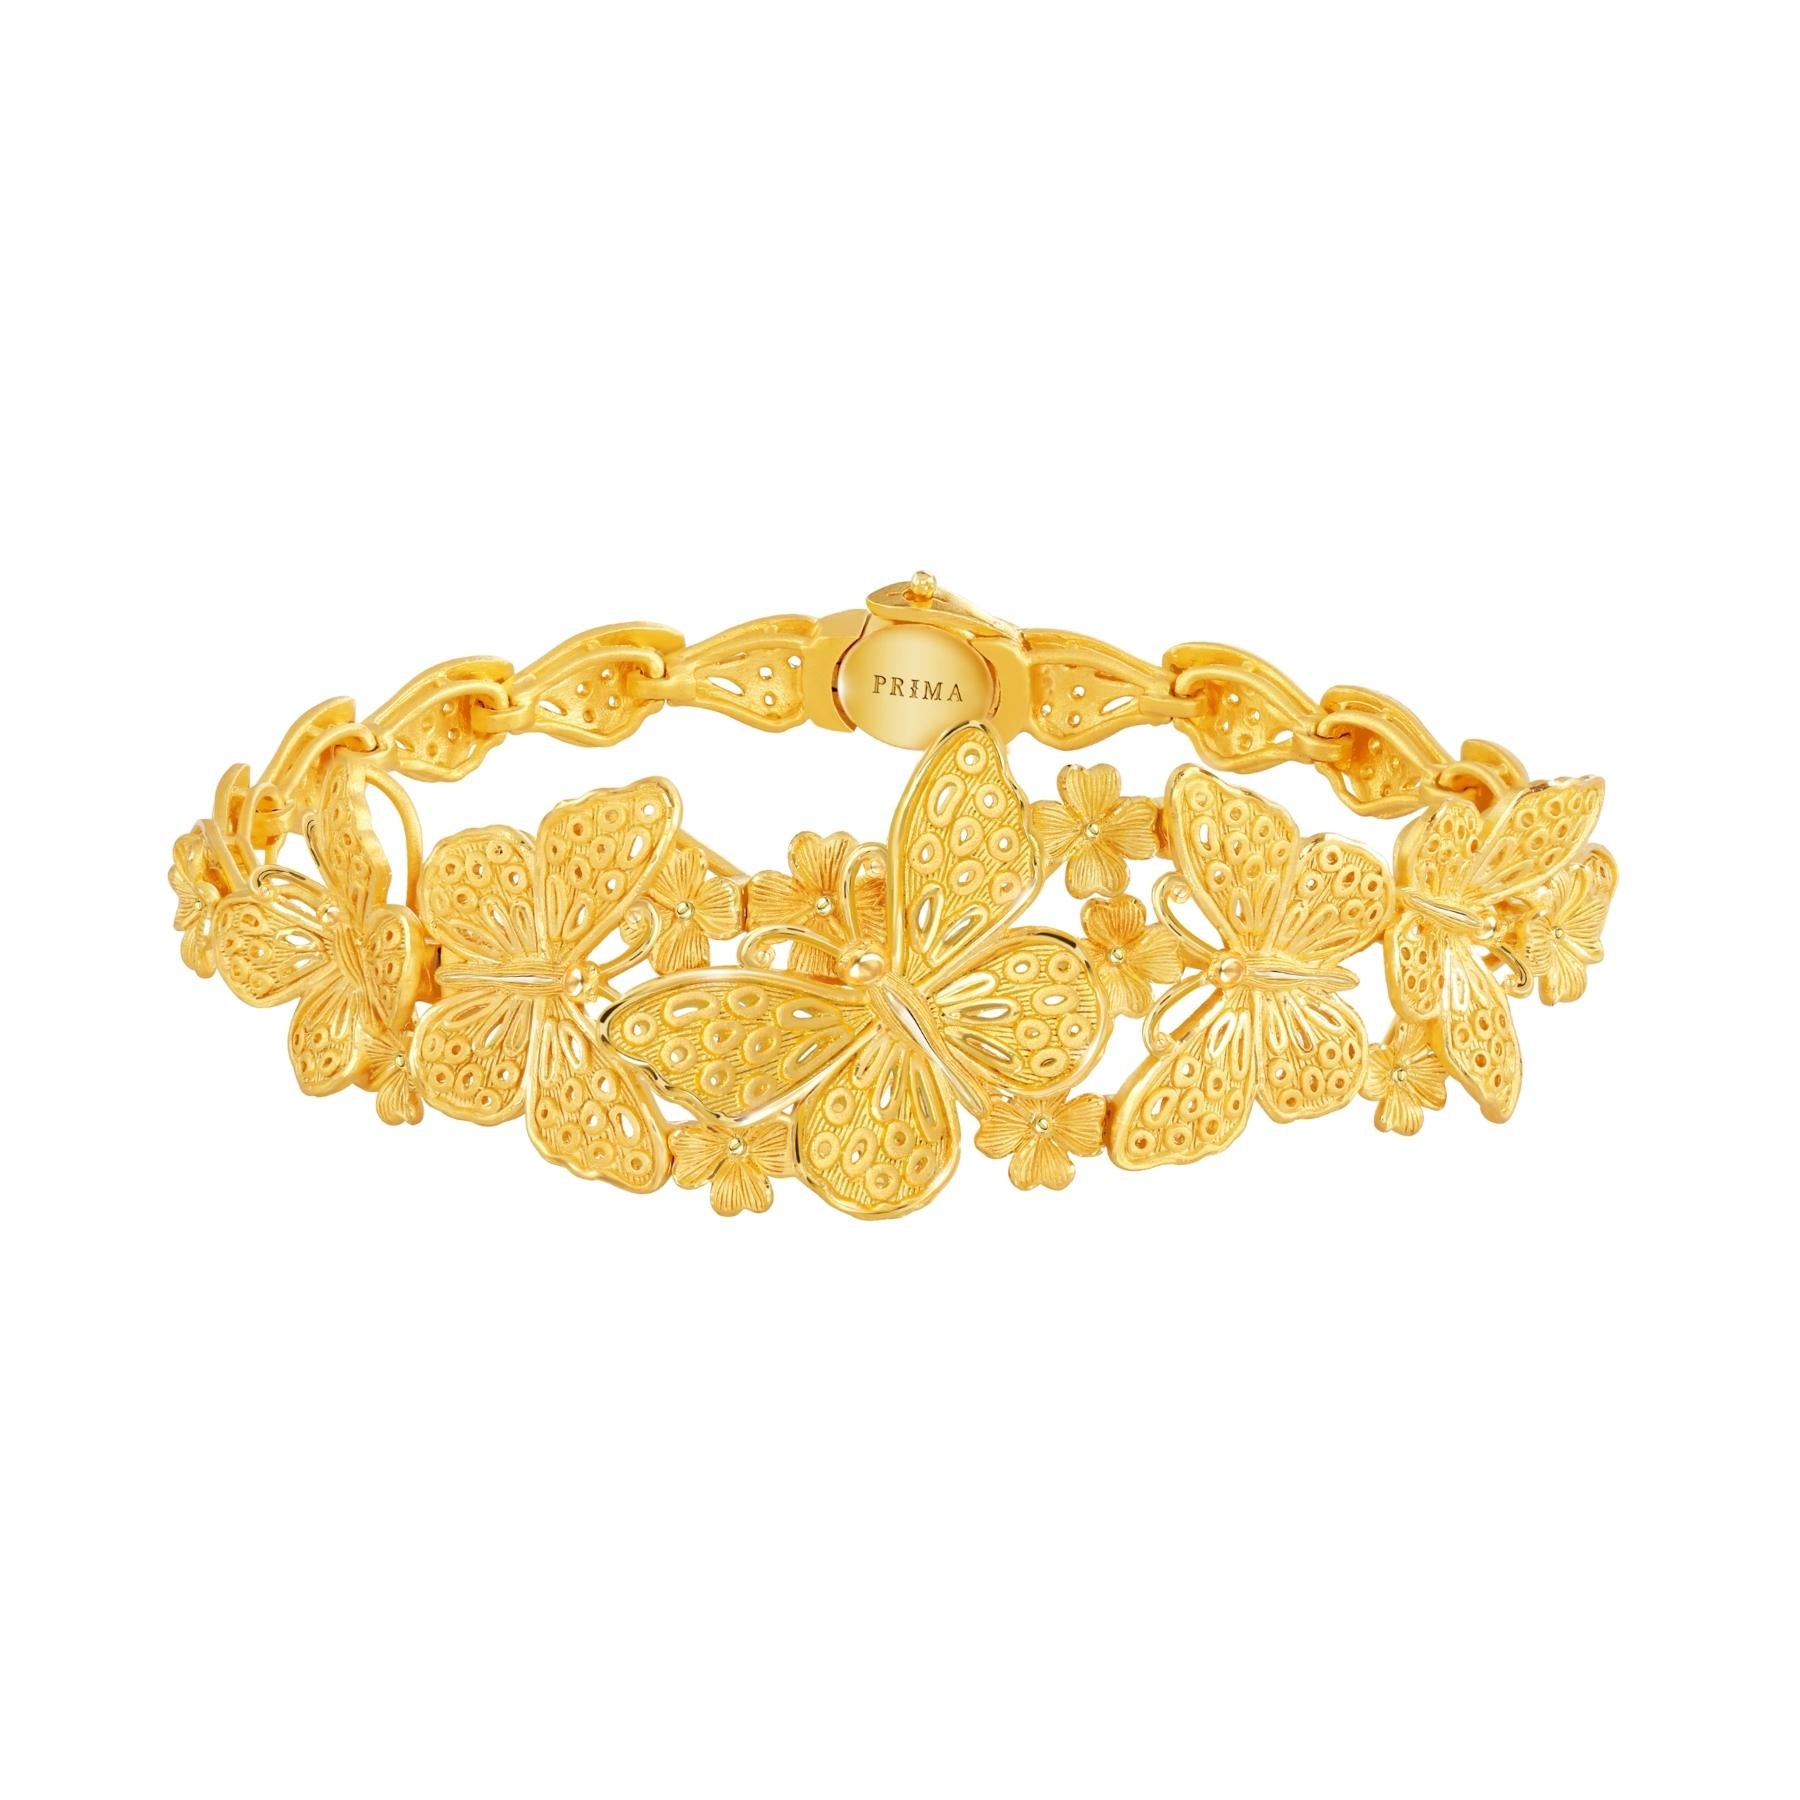 Amazon.com: GOWE Women 24k Gold Bracelet Genuine Pure 999 Gold Carambola  Female Bangle Girl Party Gift Good Nice Discount : Clothing, Shoes & Jewelry